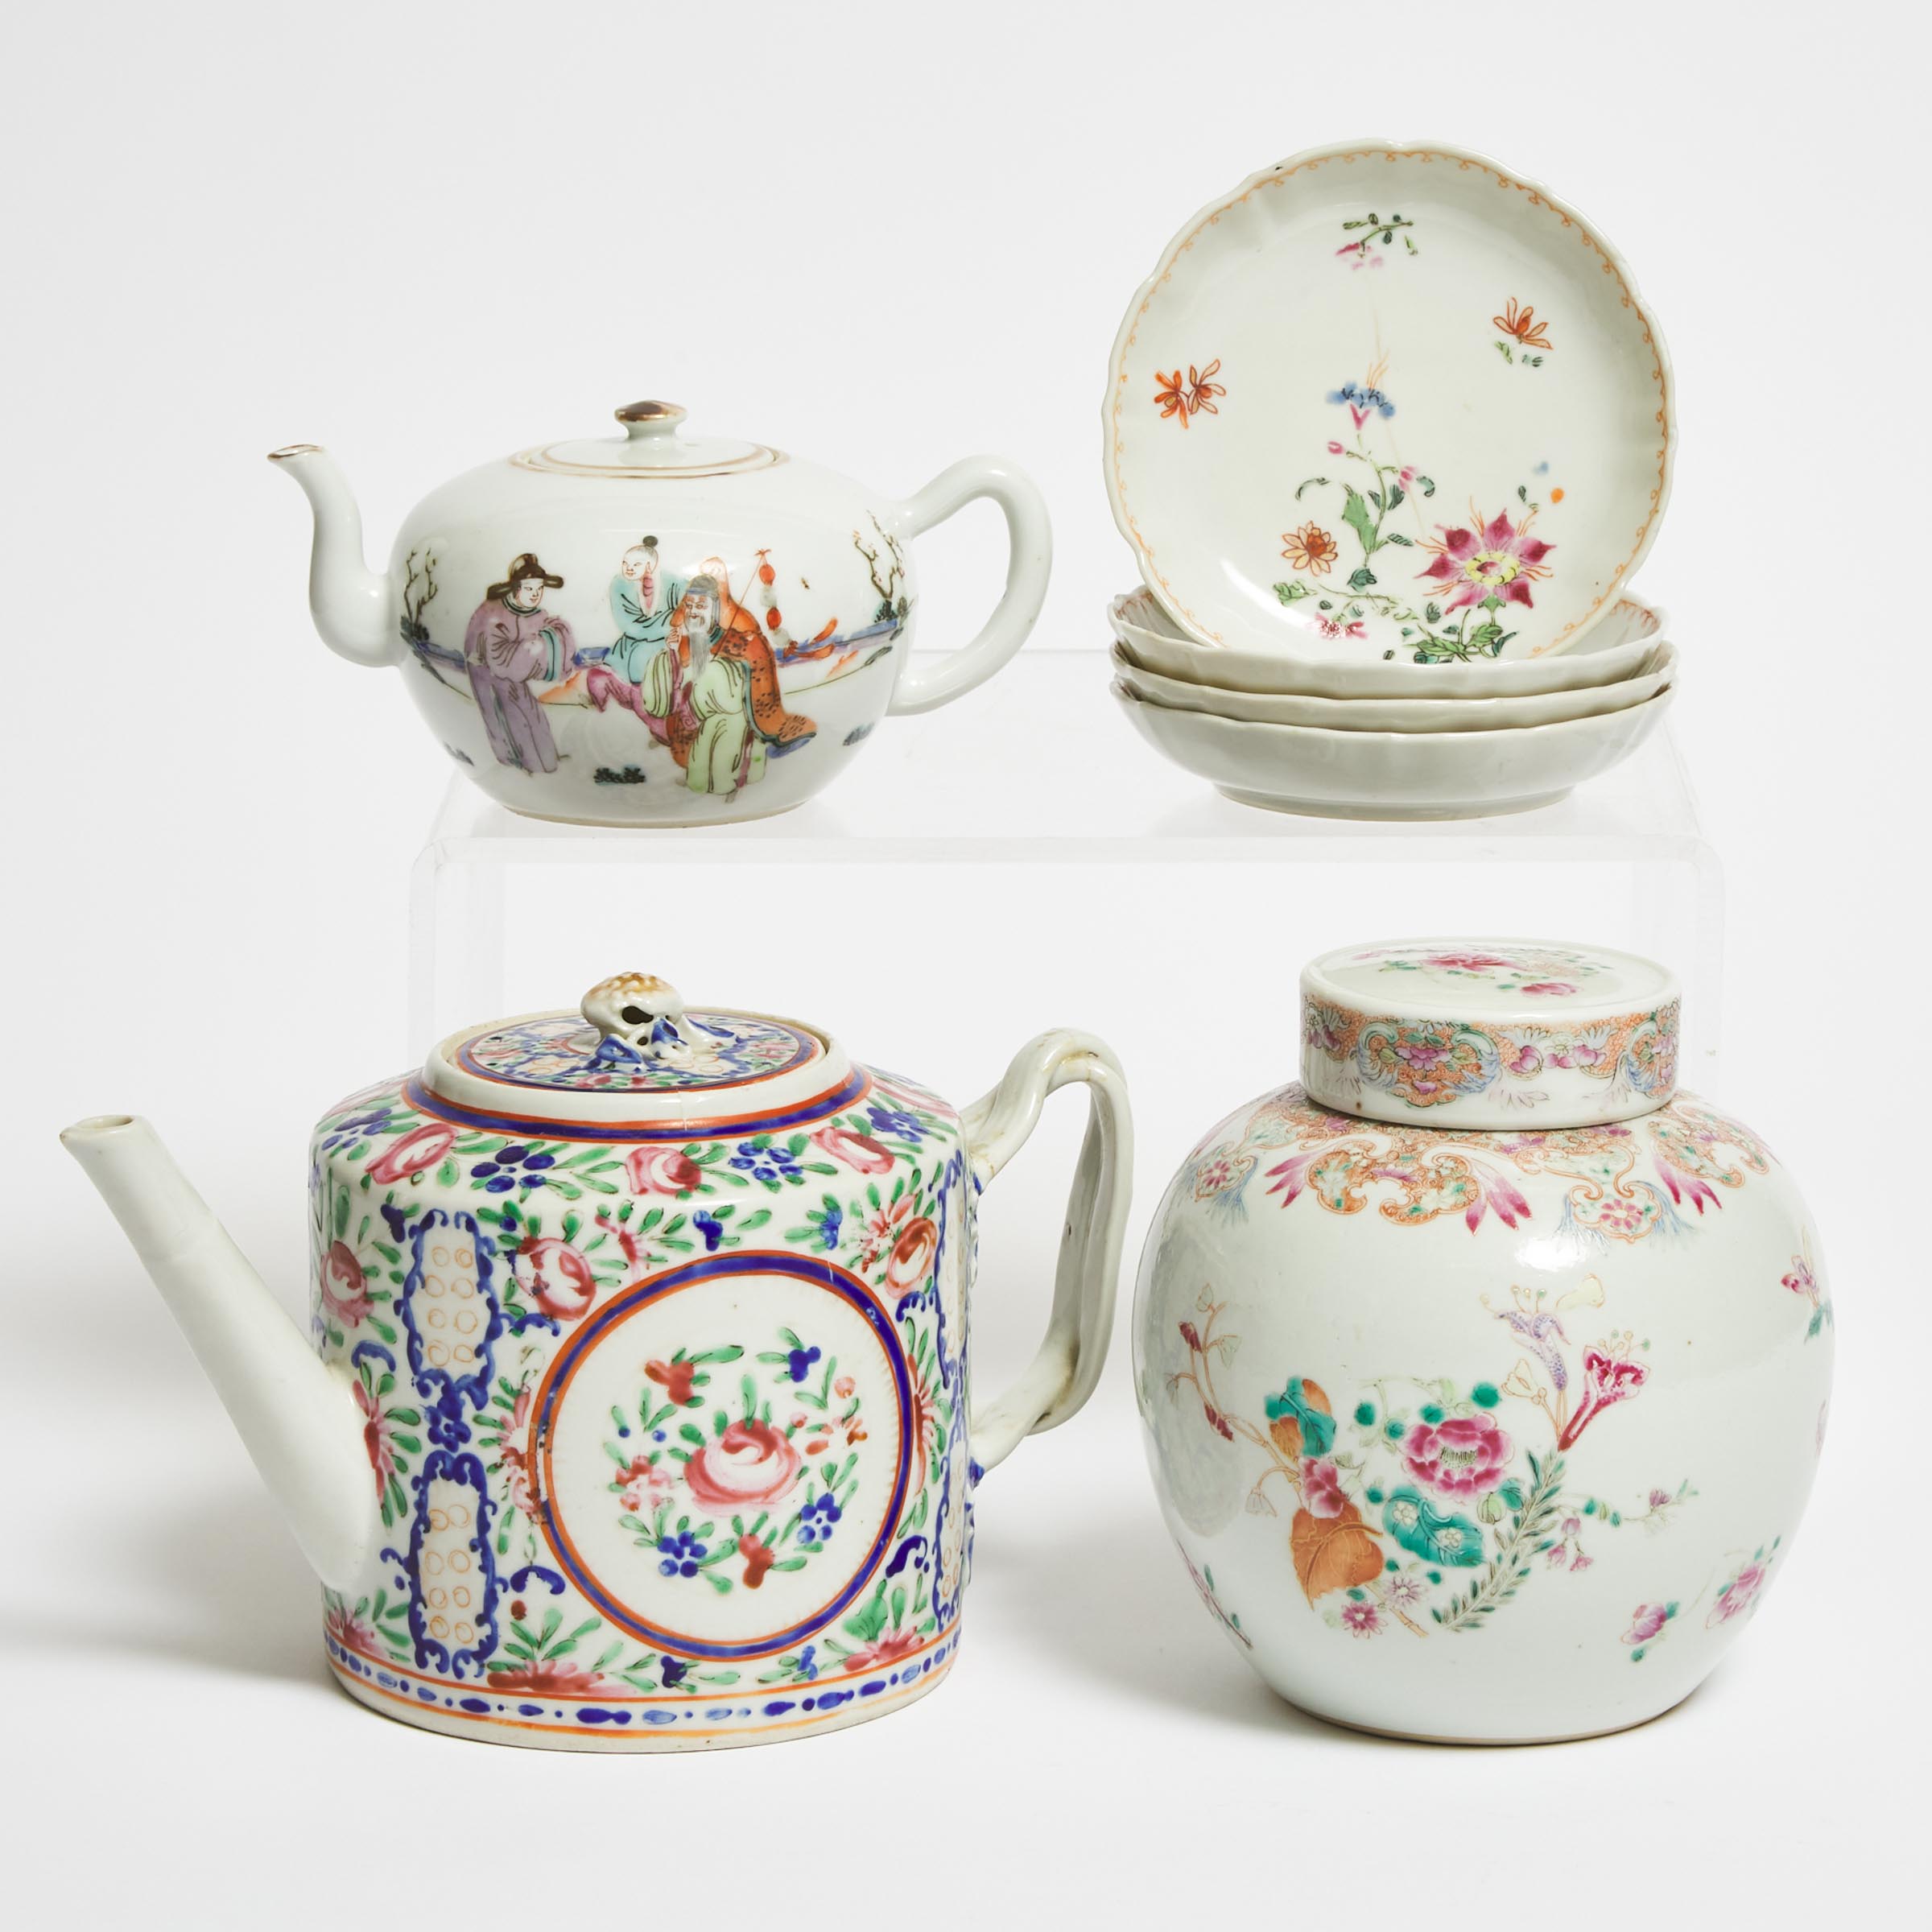 A Group of Seven Famille Rose Teapots, Jar, and Dishes, 18th/19th Century